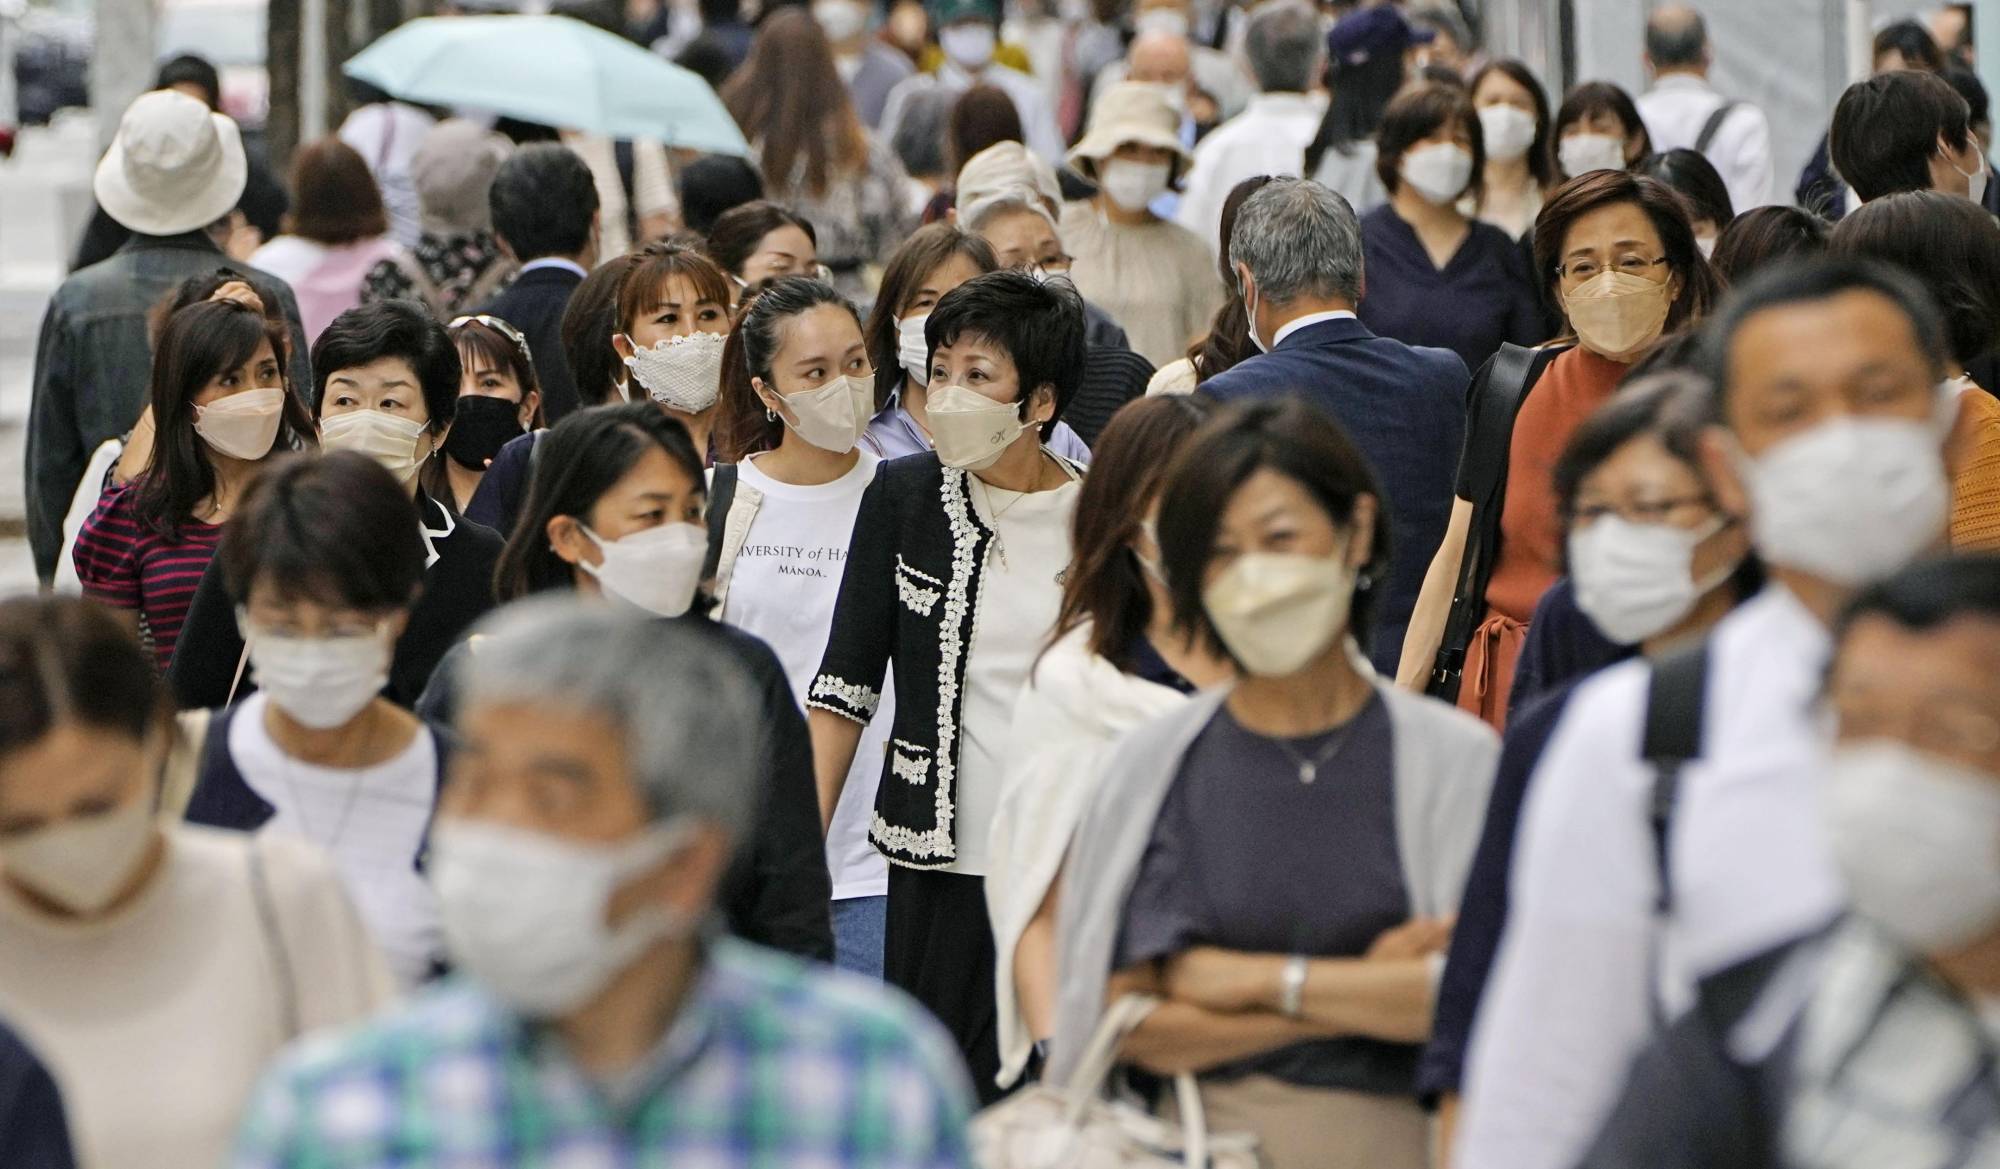 Japan's latest COVID guidelines: Masks OK to come off outside when